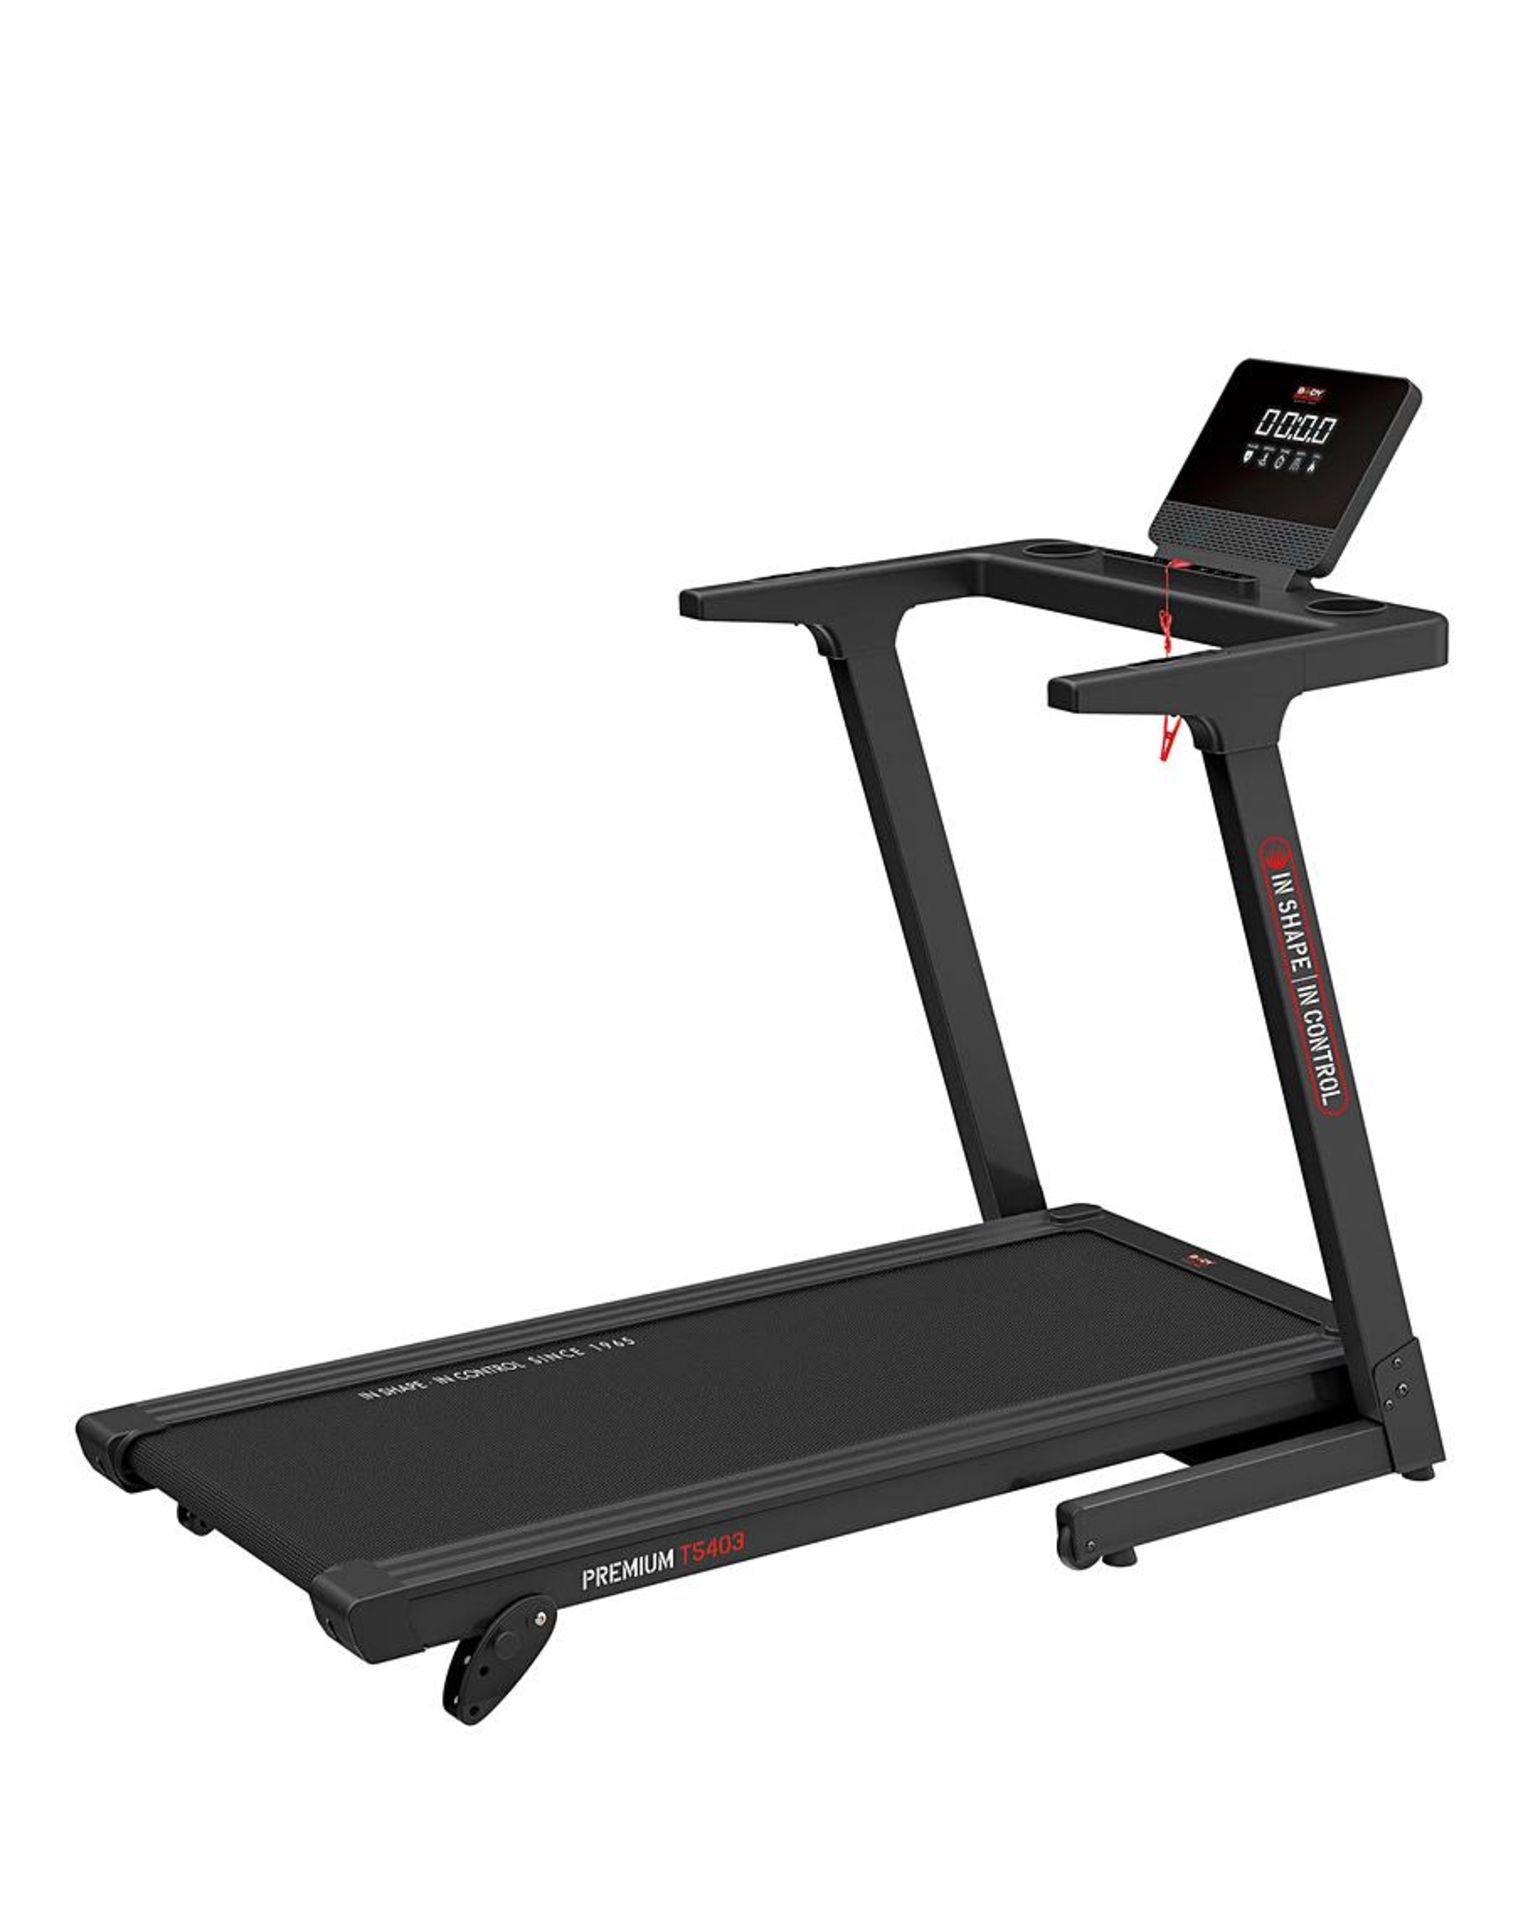 Body Sculpture Motorised Treadmill Manual Incline. RRP £500.00. - SR4. Comes with IConsole APP,